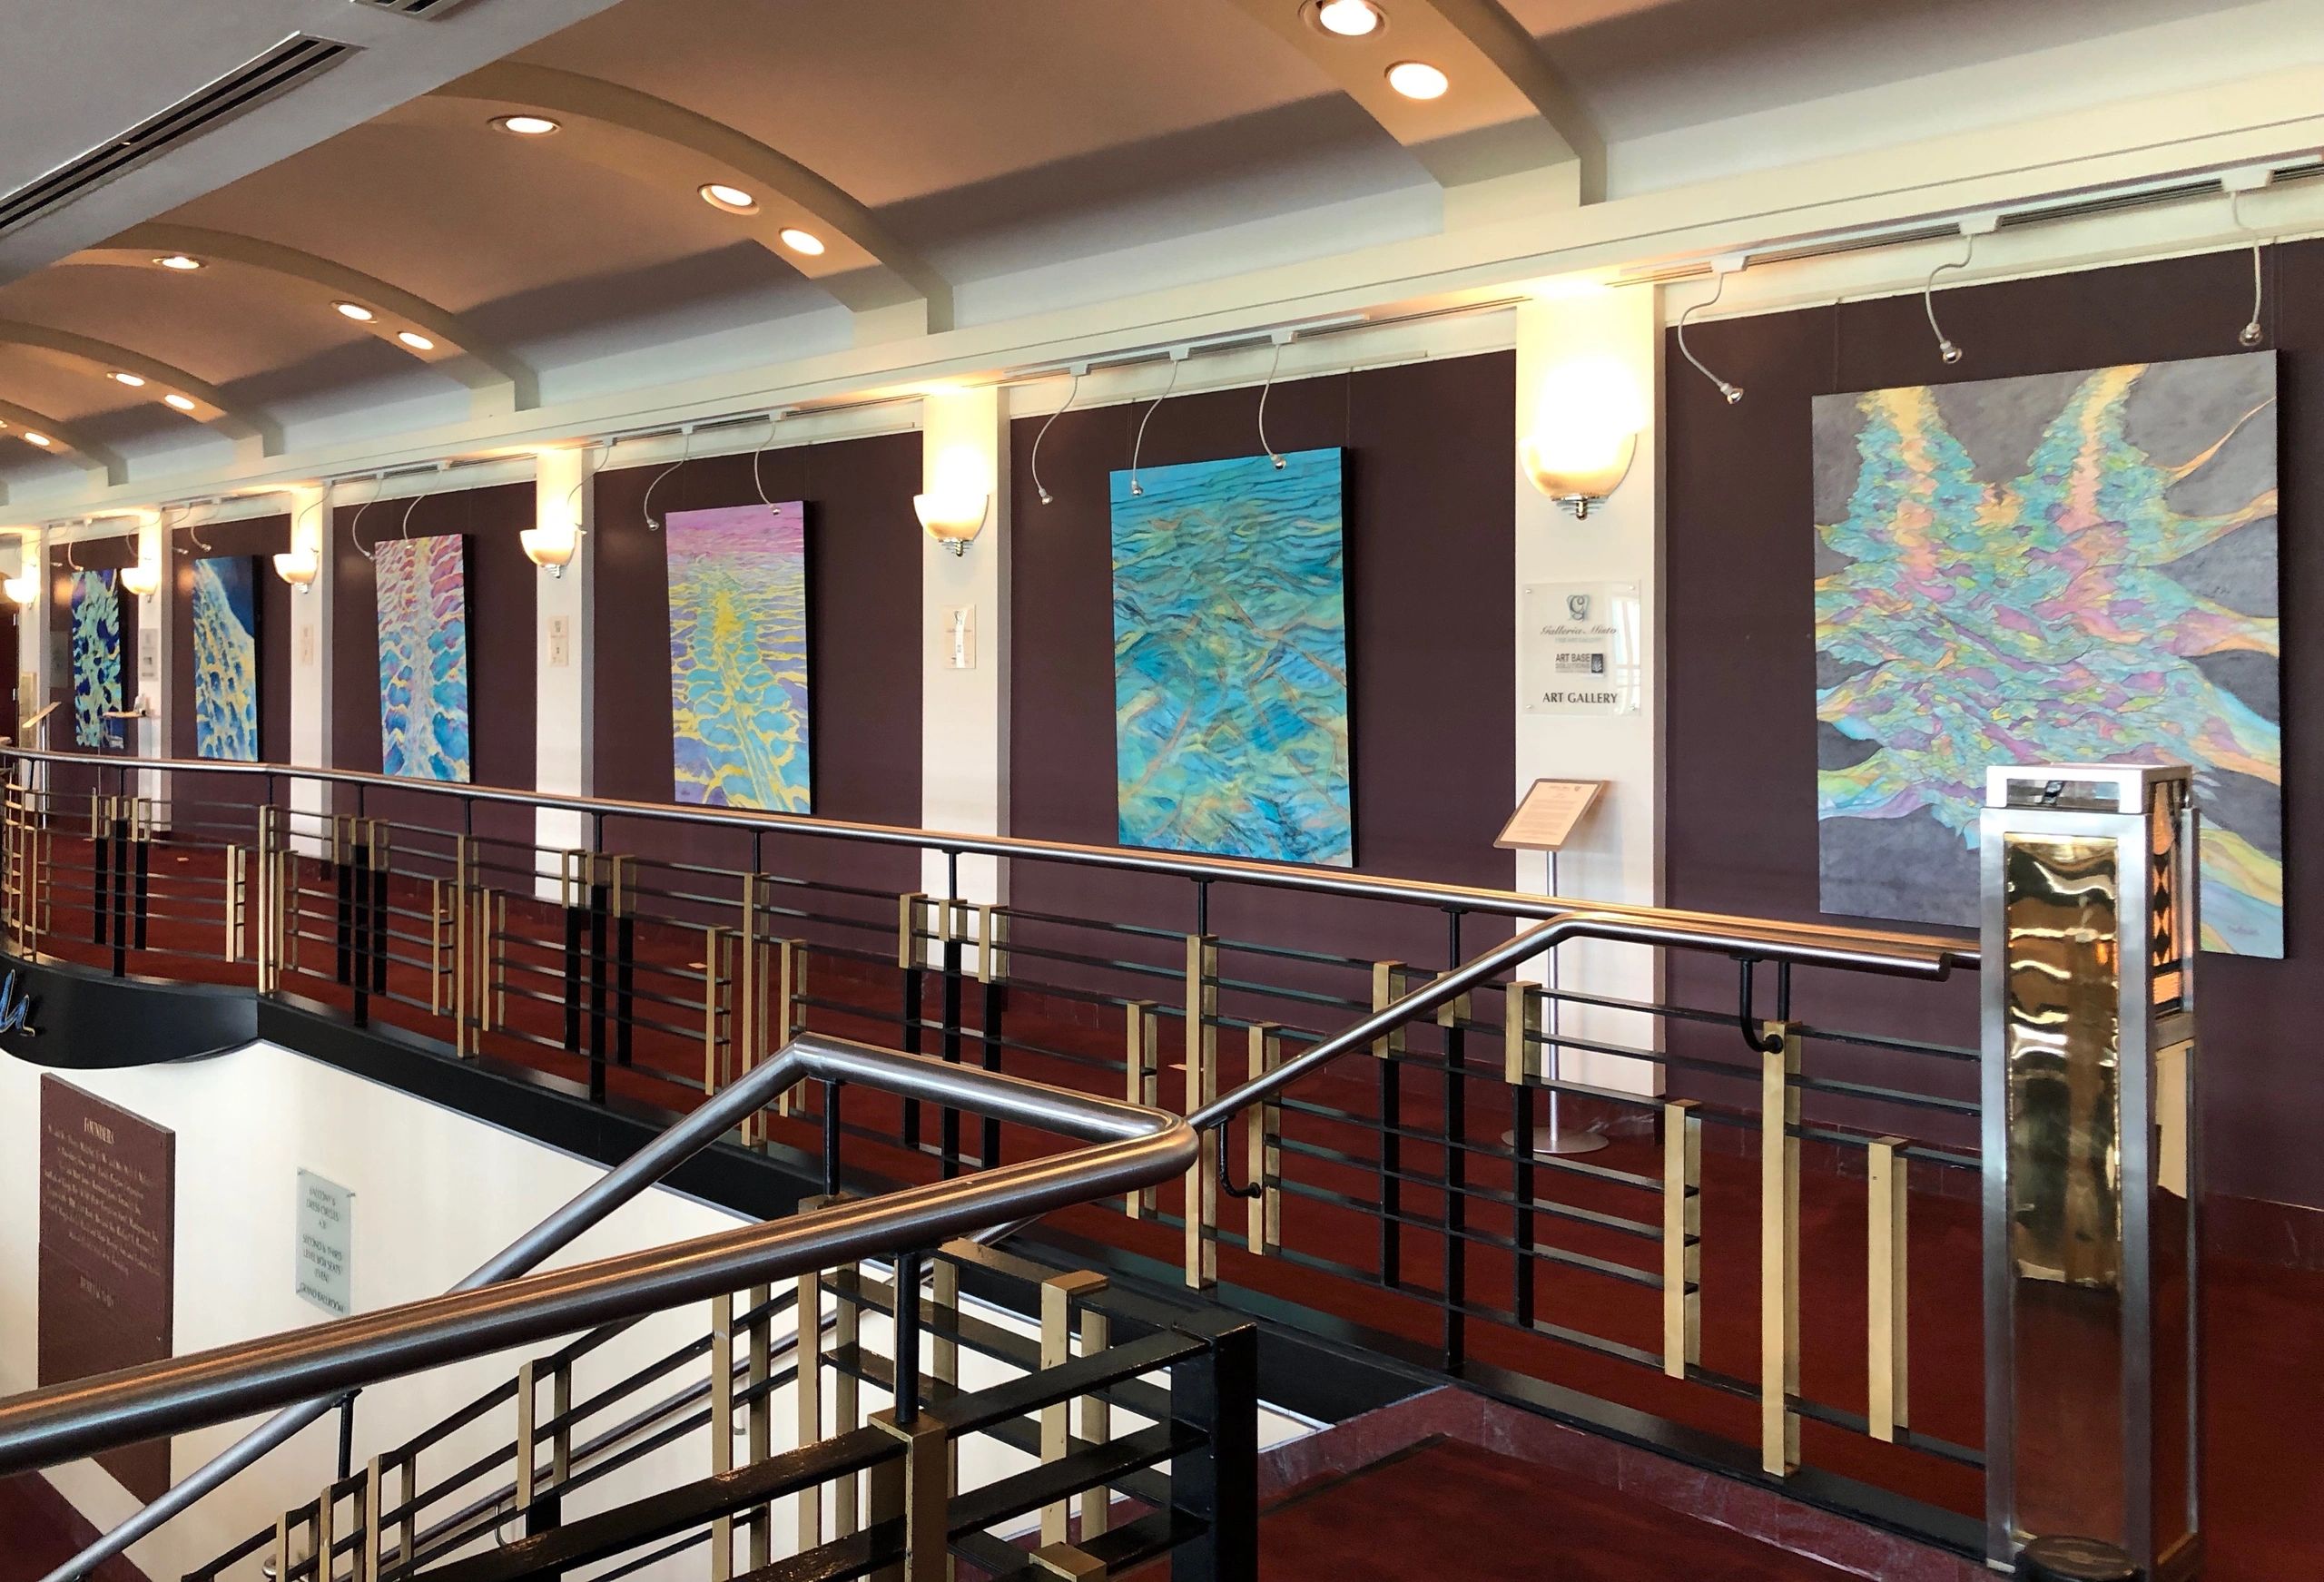 My Featured Artist Exhibit at Duke Energy Center For The Arts/Mahaffey Theater